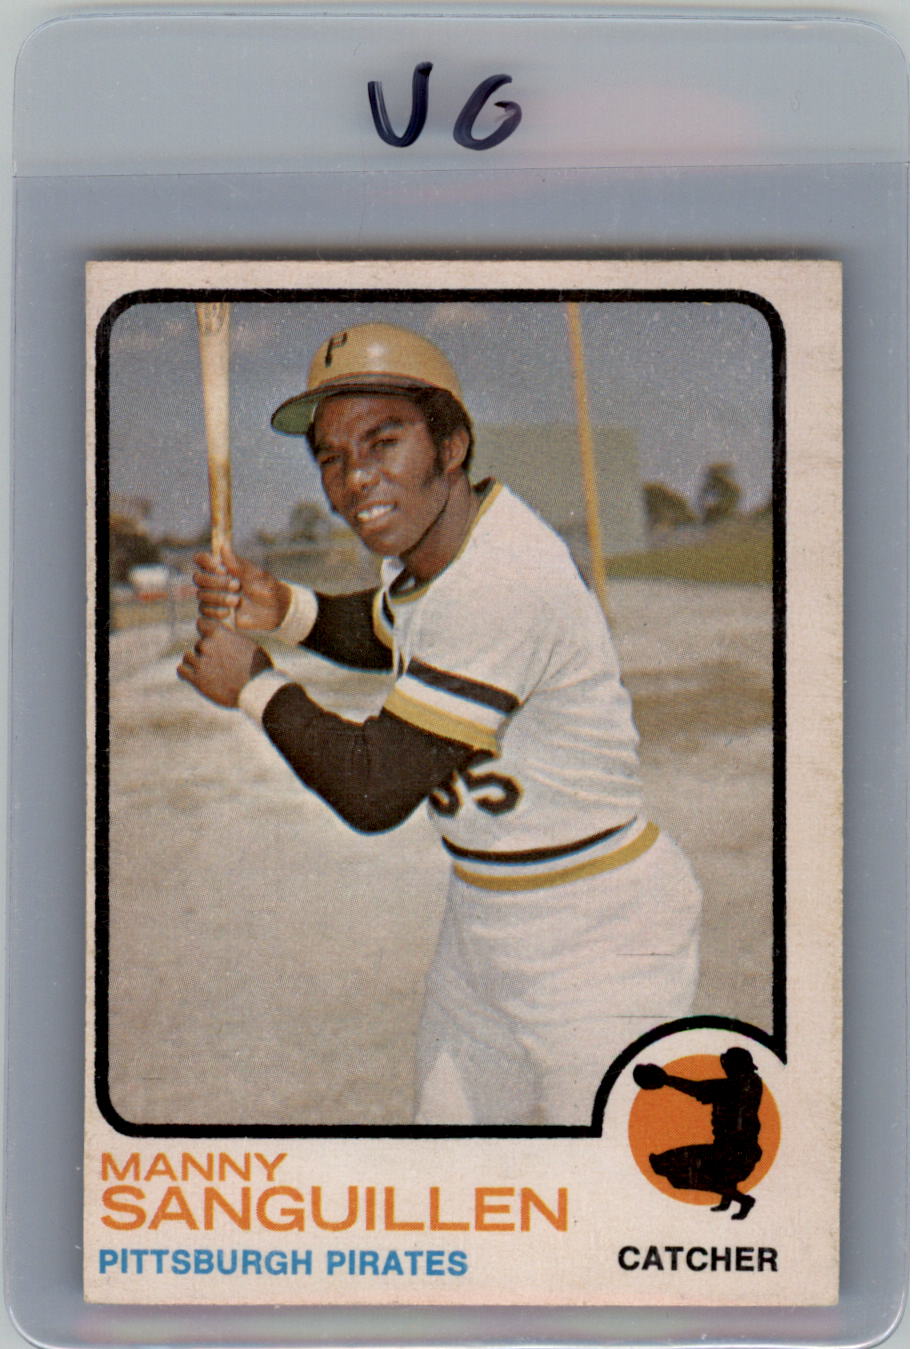 1973 O-Pee-Chee #250 Manny Sanguillen - VG - Triple Play Sports Cards